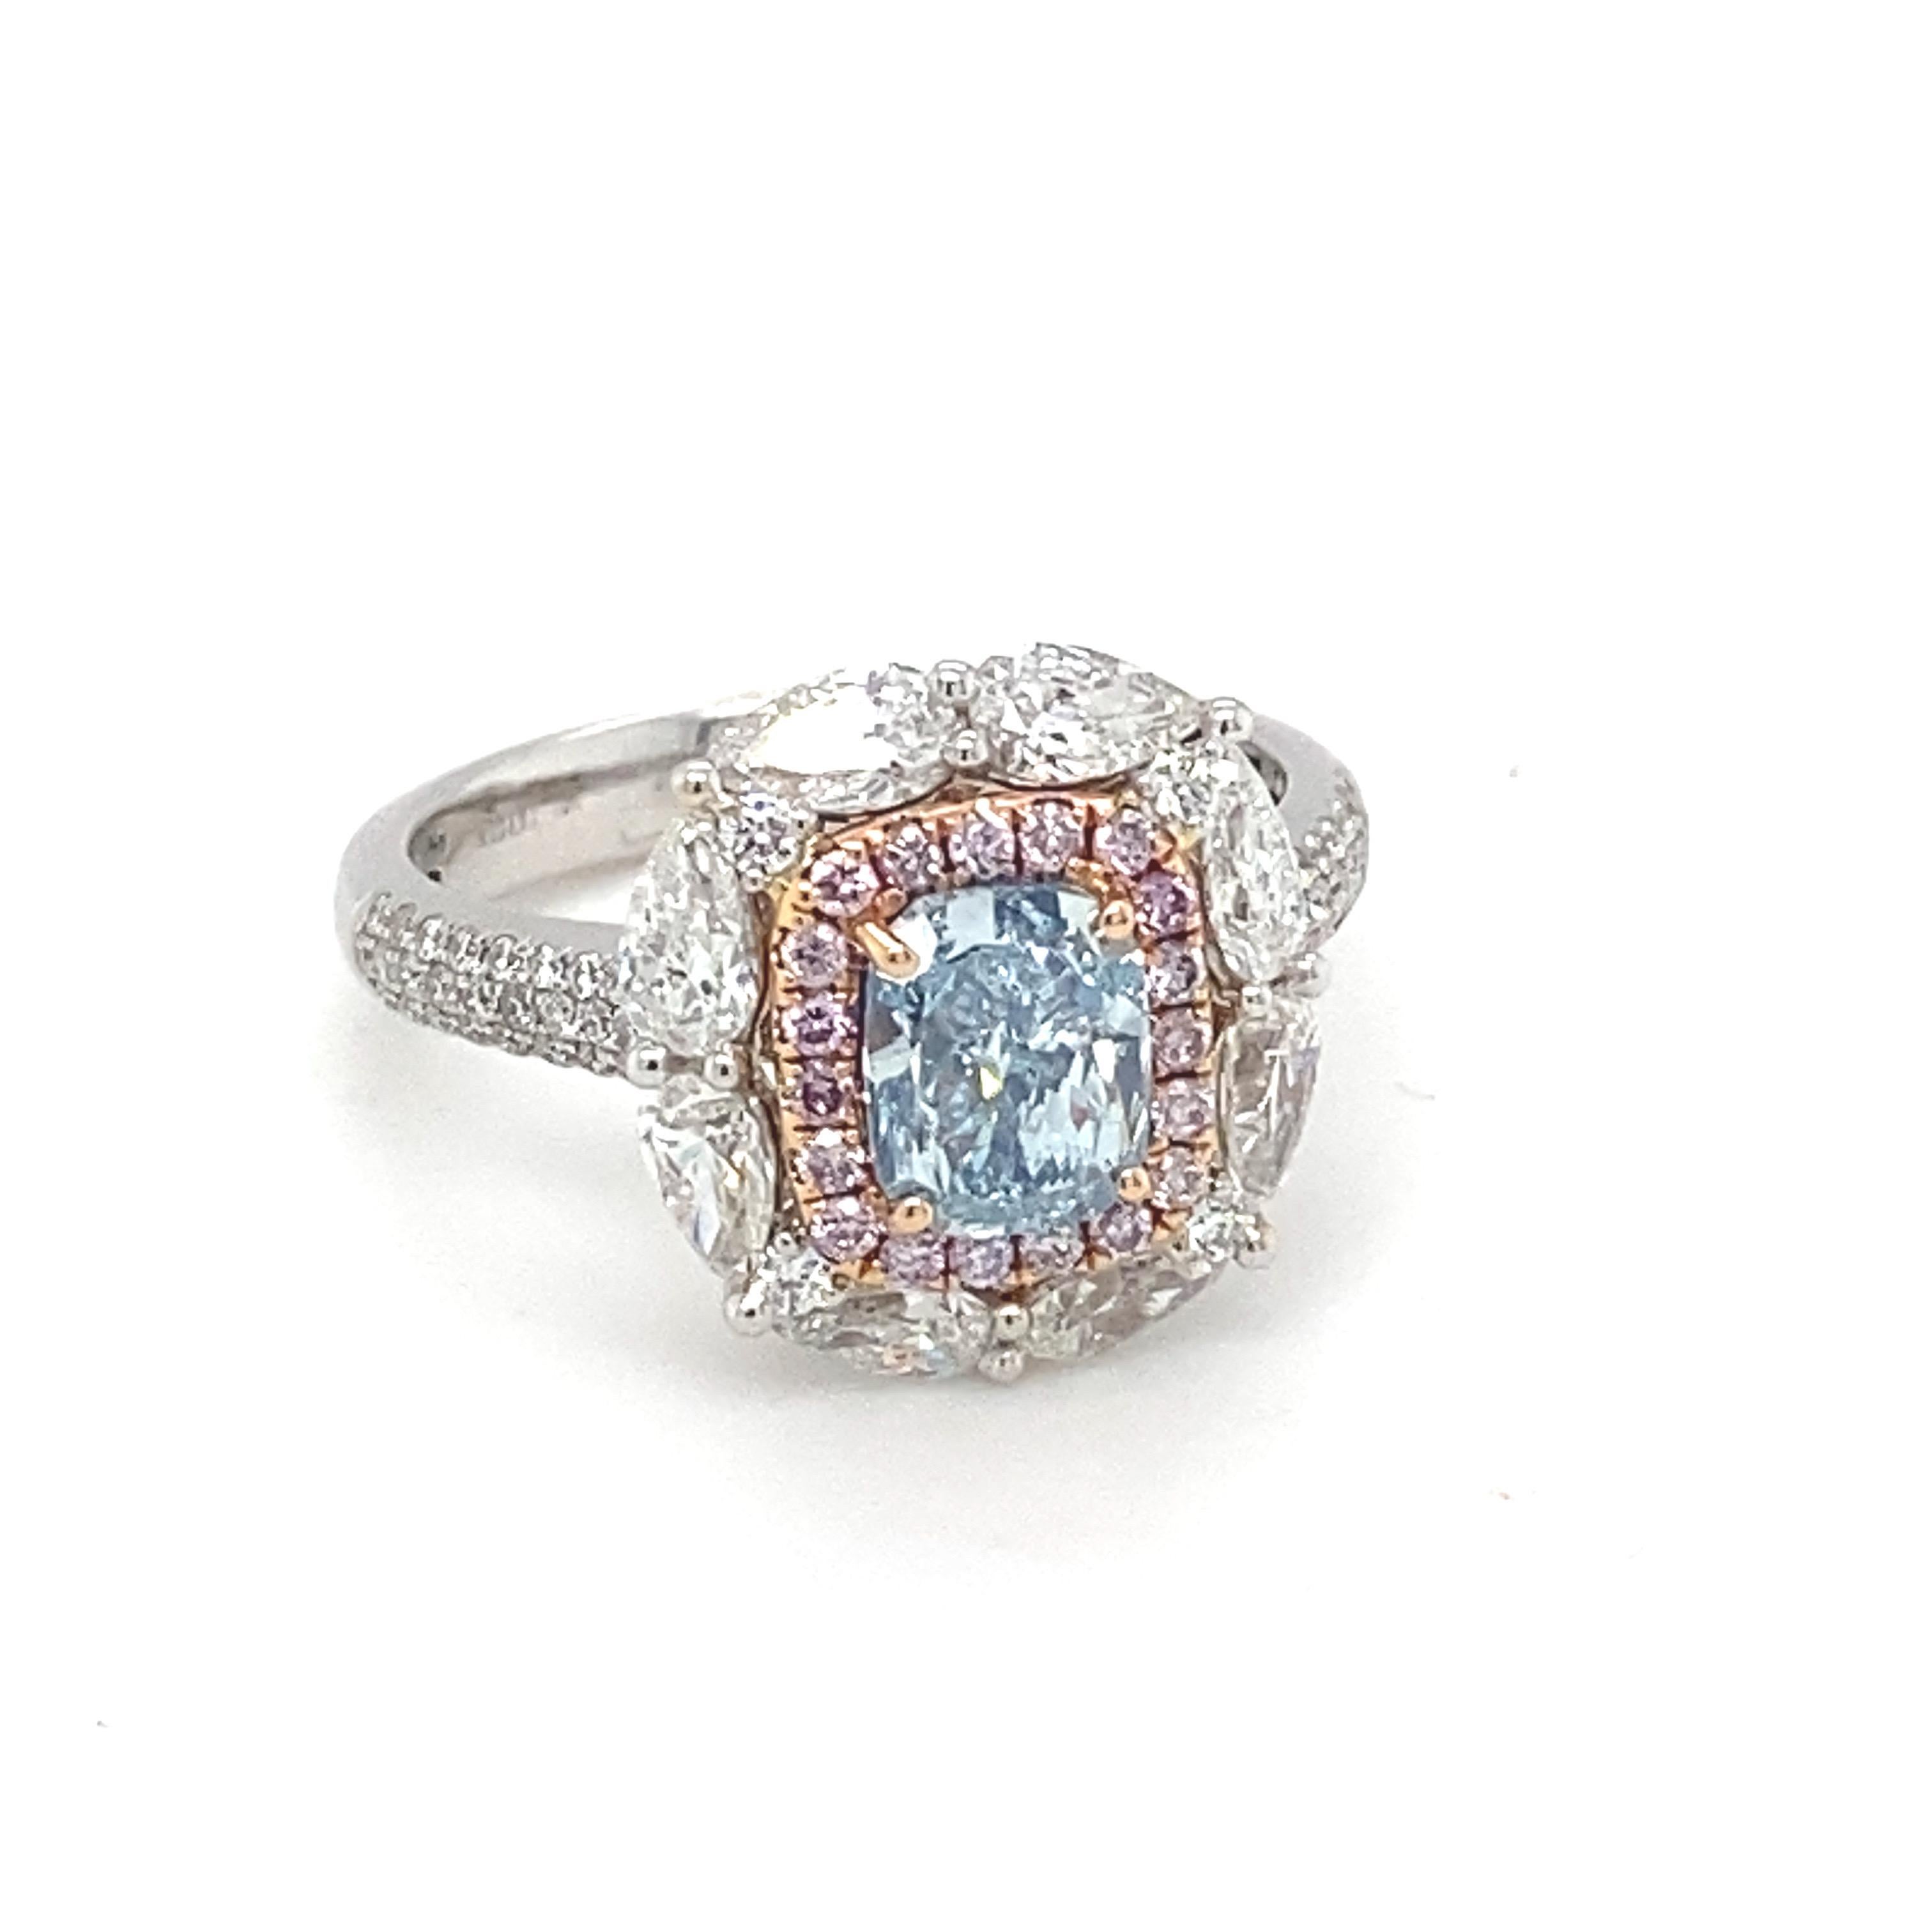 This opulent ring boasts a highly desirable GIA Certified 1.20 Carat cushion shape Natural Blue Diamond is framed by a glittery halo of pink diamond which is surrounded by pear shape diamond. The spectacular radiance of these majestic blue, pink and